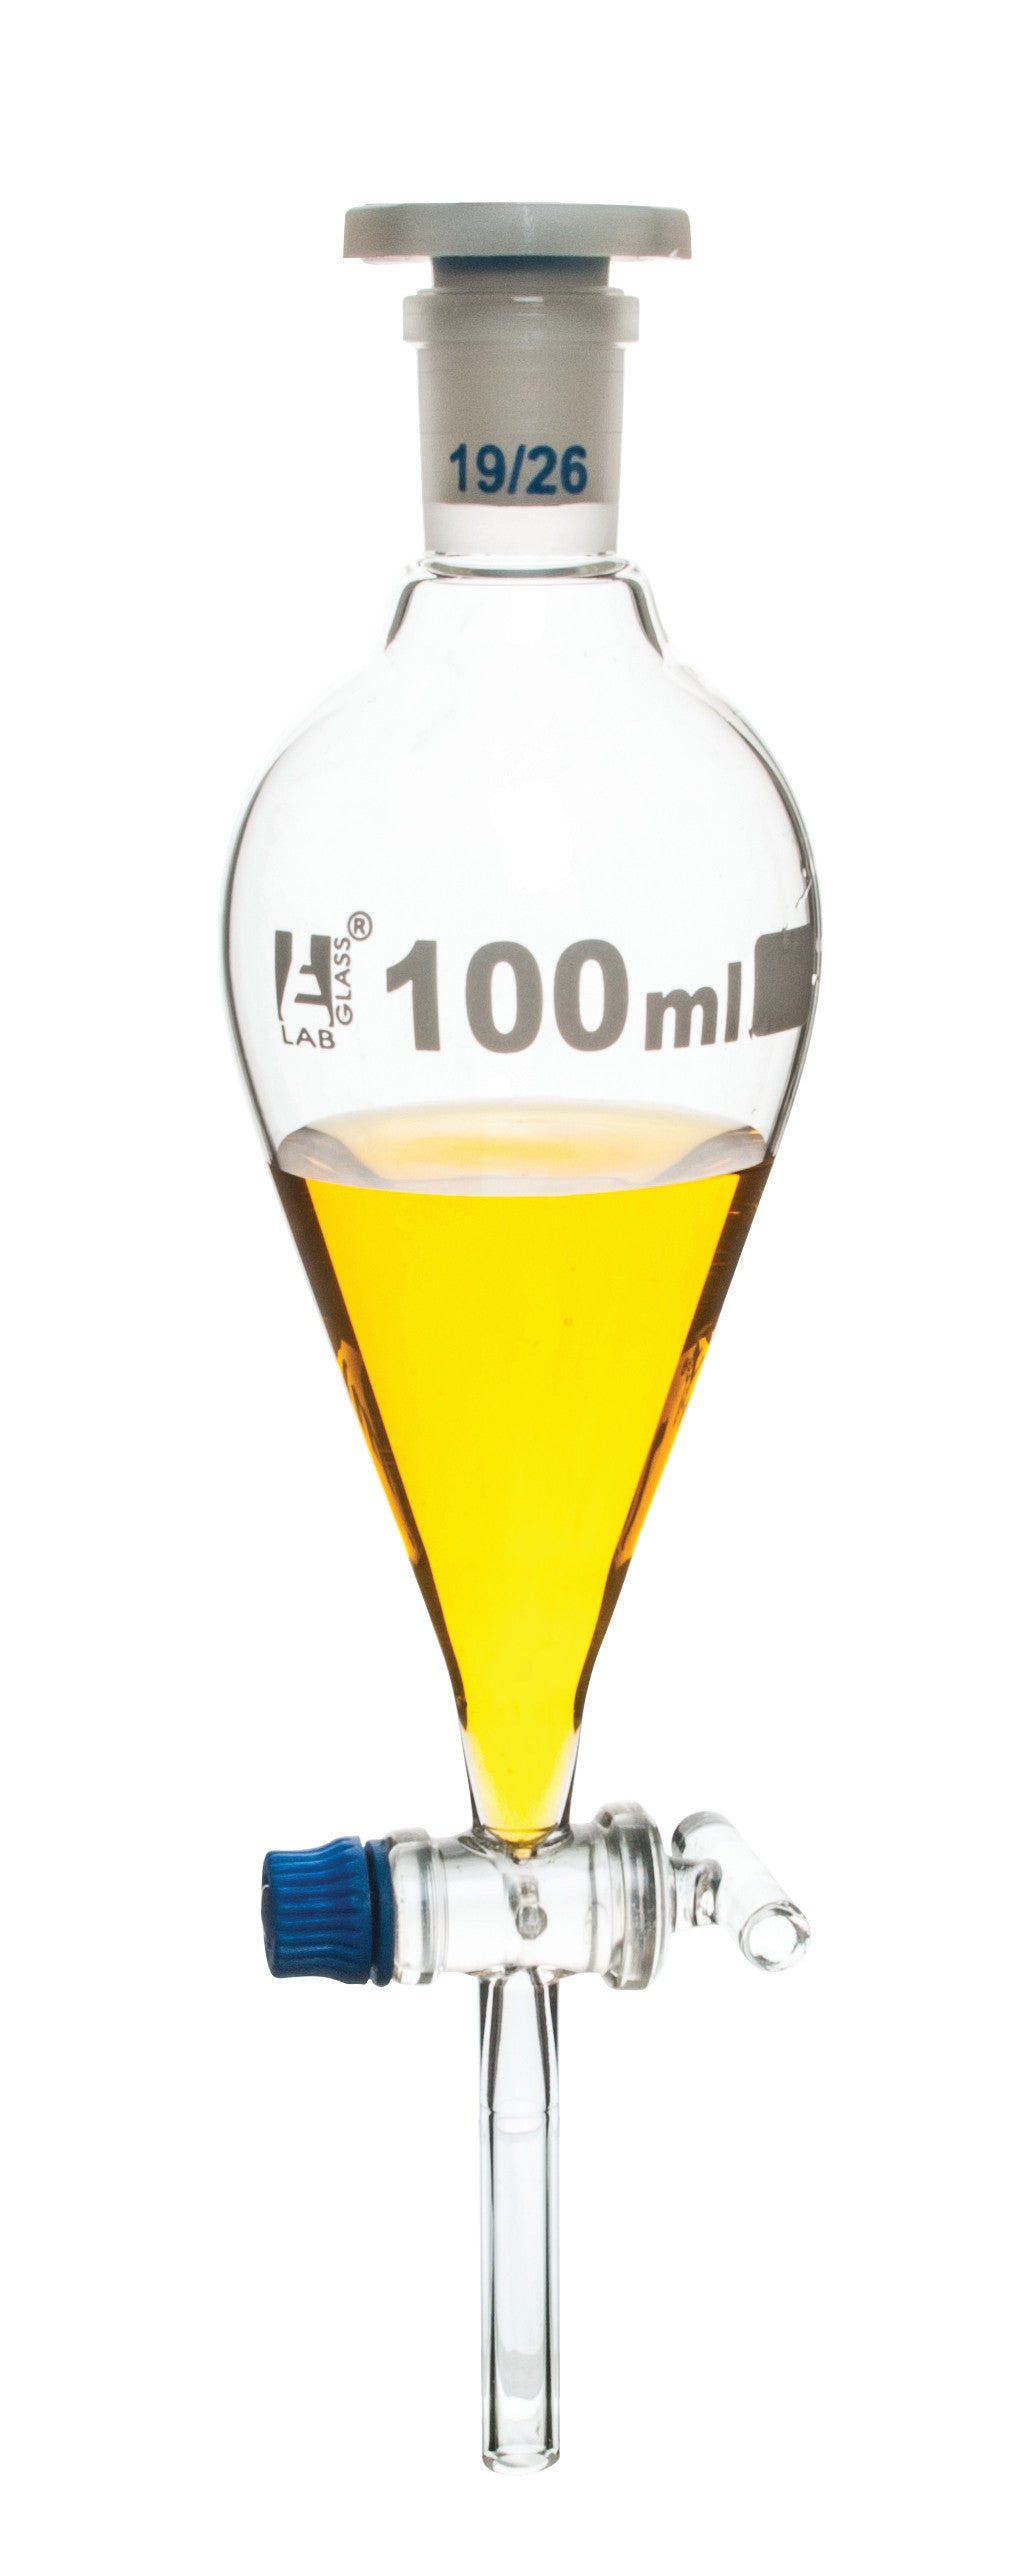 Glass Squibb Separatory Funnel with Glass Key Stopcock and Interchangeable Polypropylene Stopper, 100 ml, Autoclavable